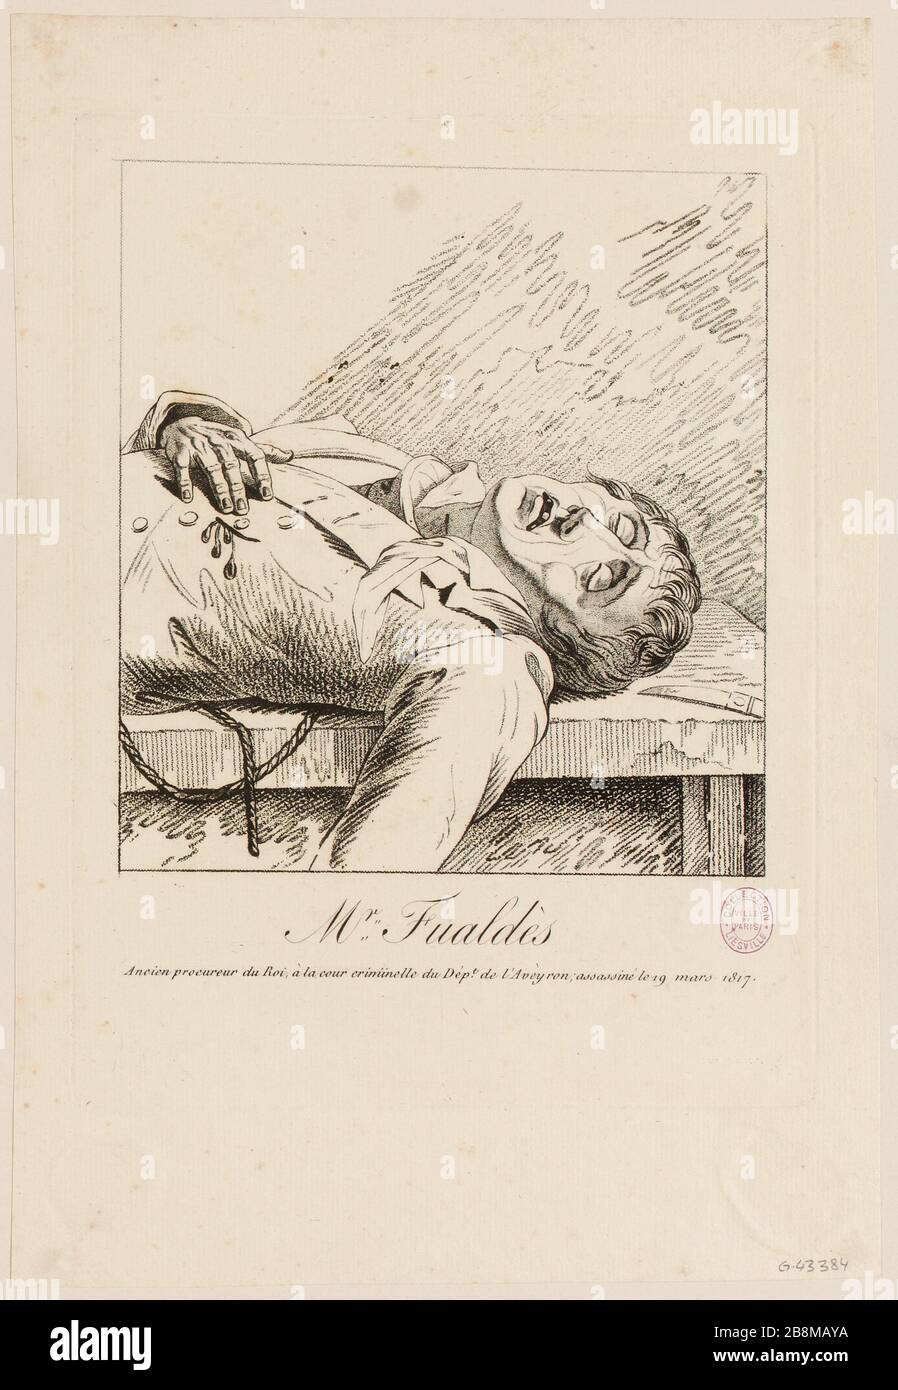 Mr. Fualdes / Former public prosecutor in the criminal court of the Dept. Aveyron; killed 19 March 1817. (TI) Stock Photo